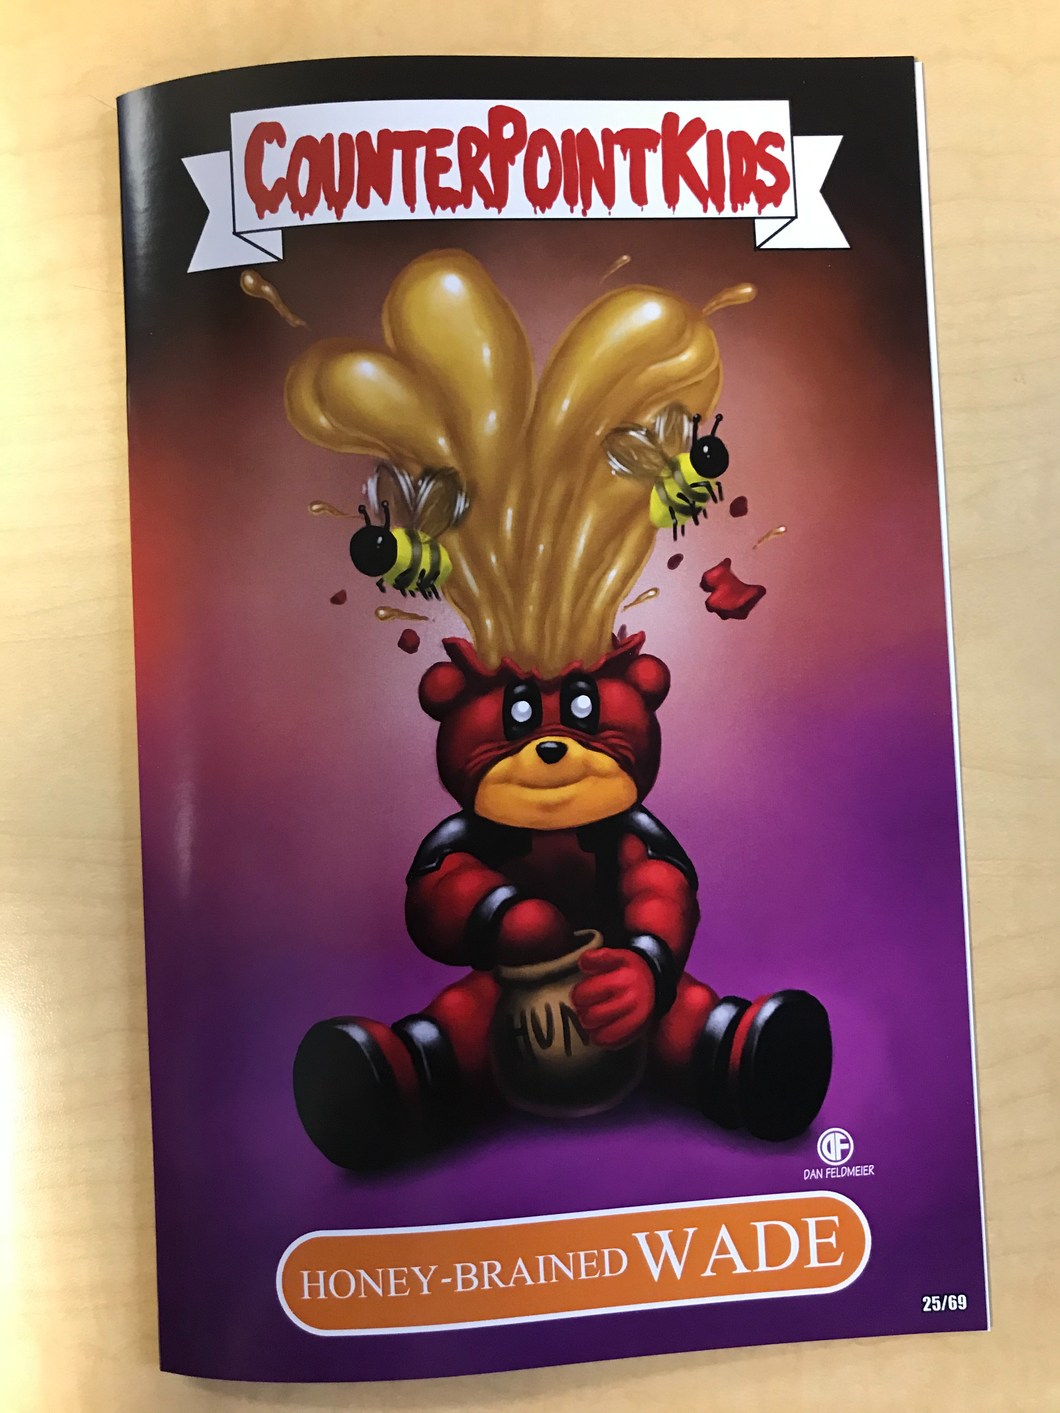 Do You Pooh? #1 Garbage Pail Kids Homage Honey-Brained Wade Variant Cover by Marat Mychaels & Dan Feldmeier BooKooComix 20th Anniversary Edition Limited to Only 69 Serial Numbered Copies!!!